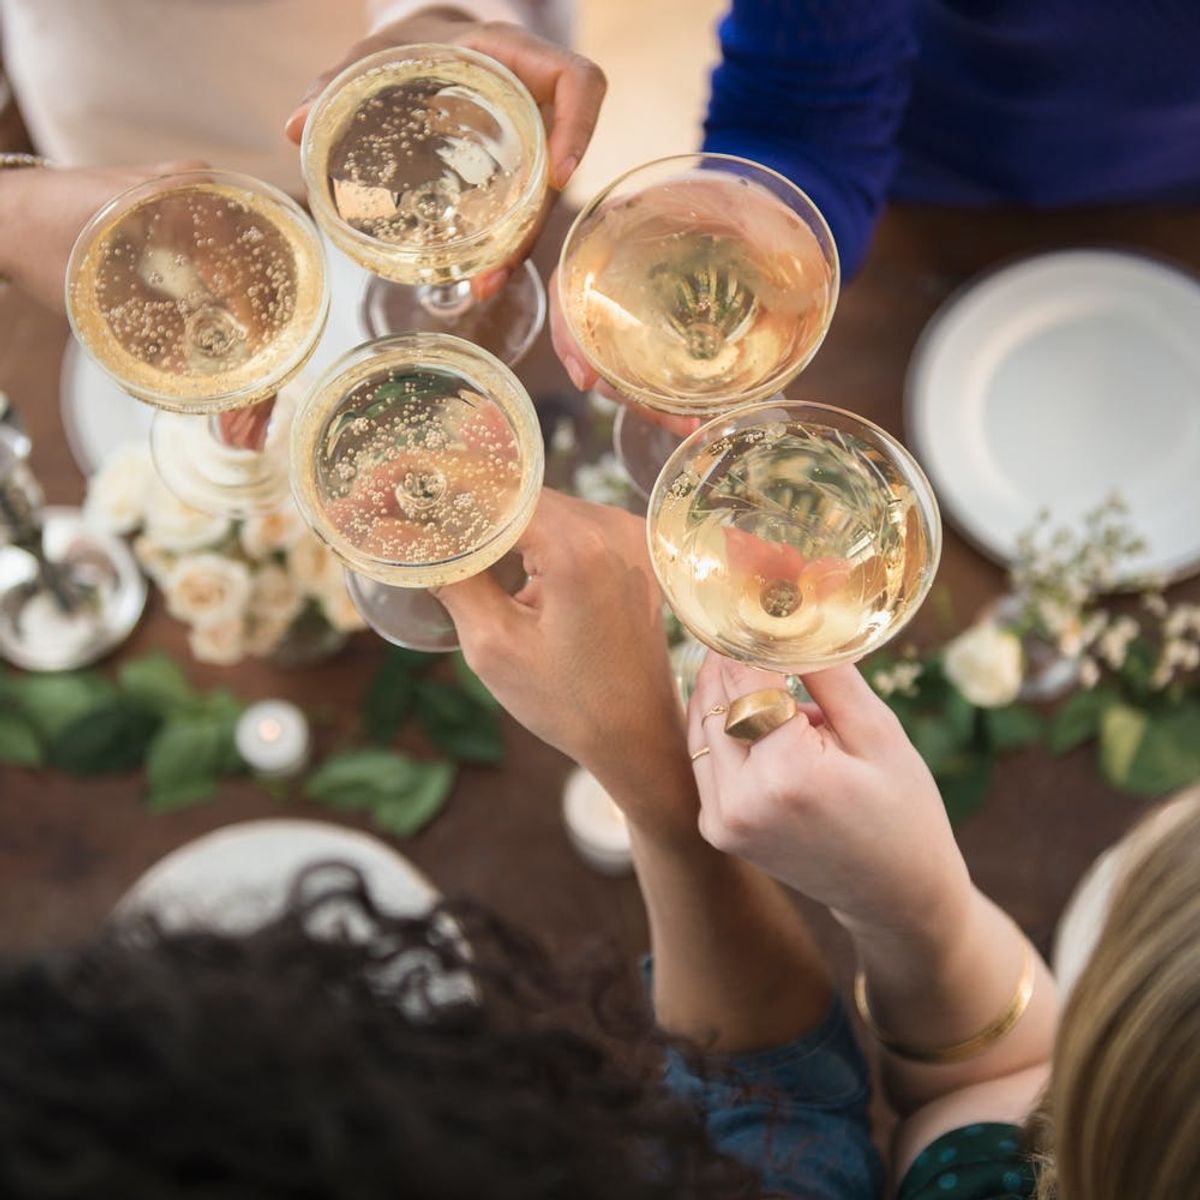 Your Perfect New Year’s Eve Plans, According to Your Zodiac Sign